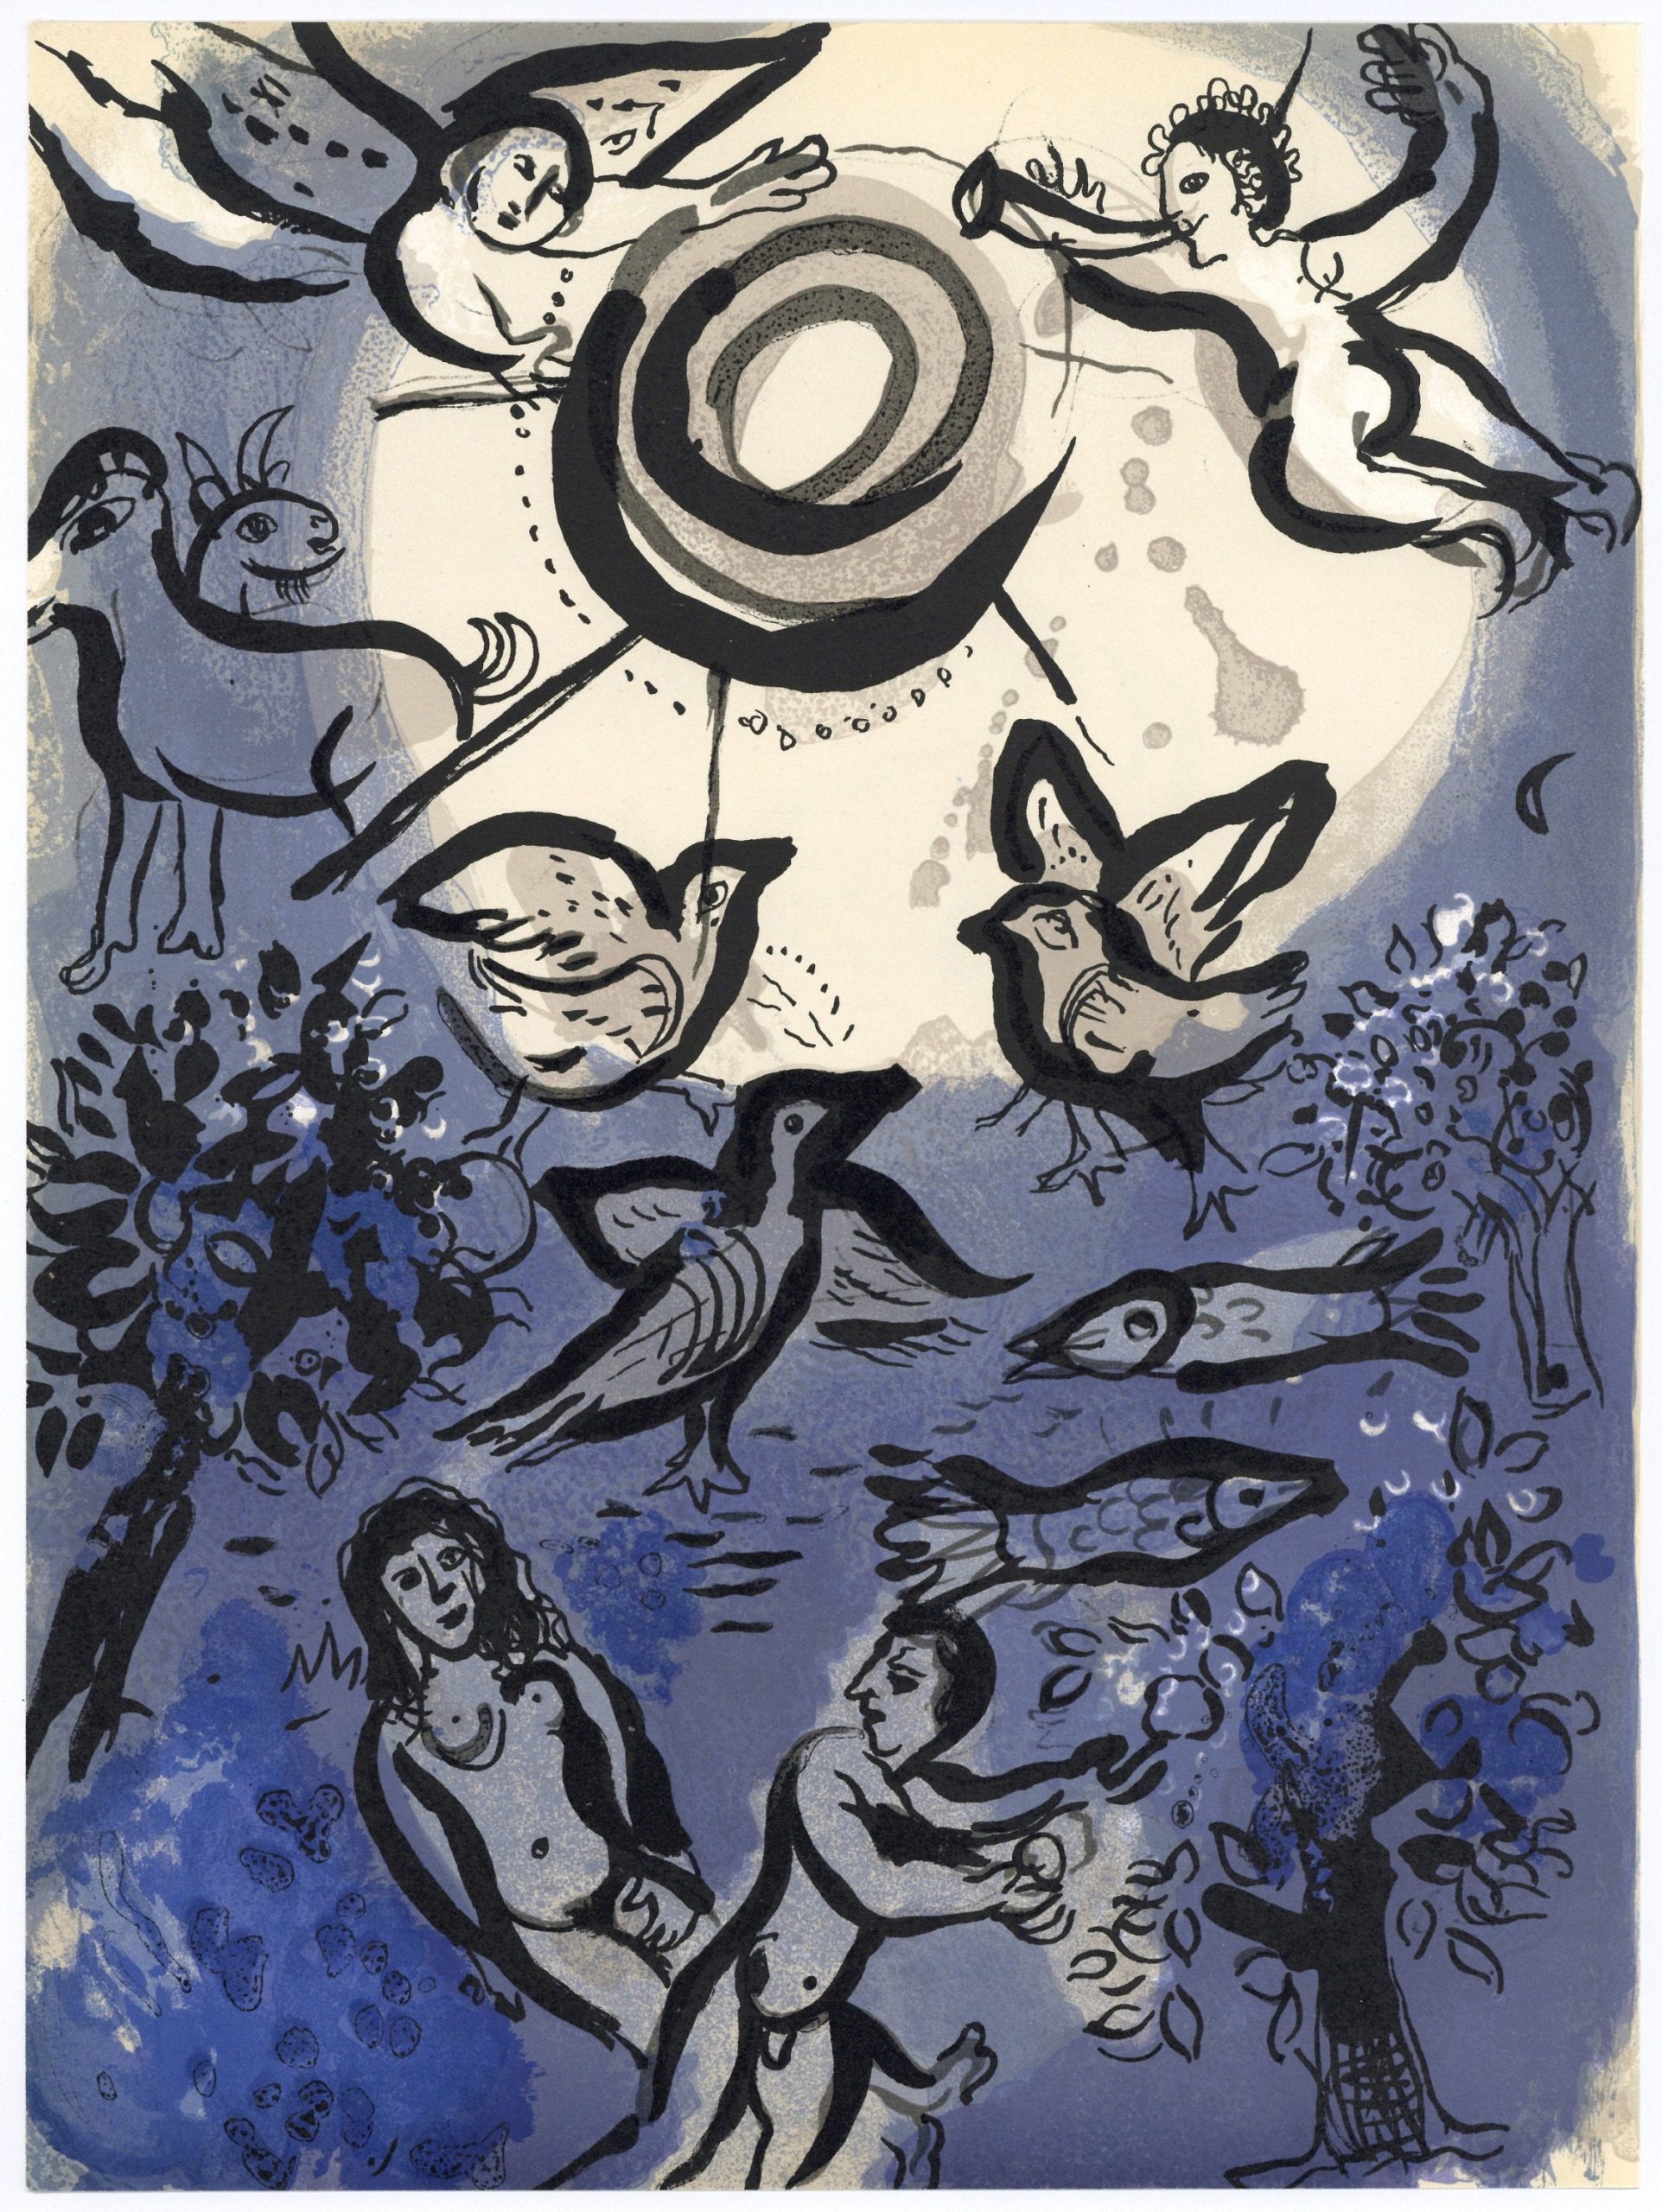 Marc Chagall, Lithograph 1960, Drawings for the Bible, Creation